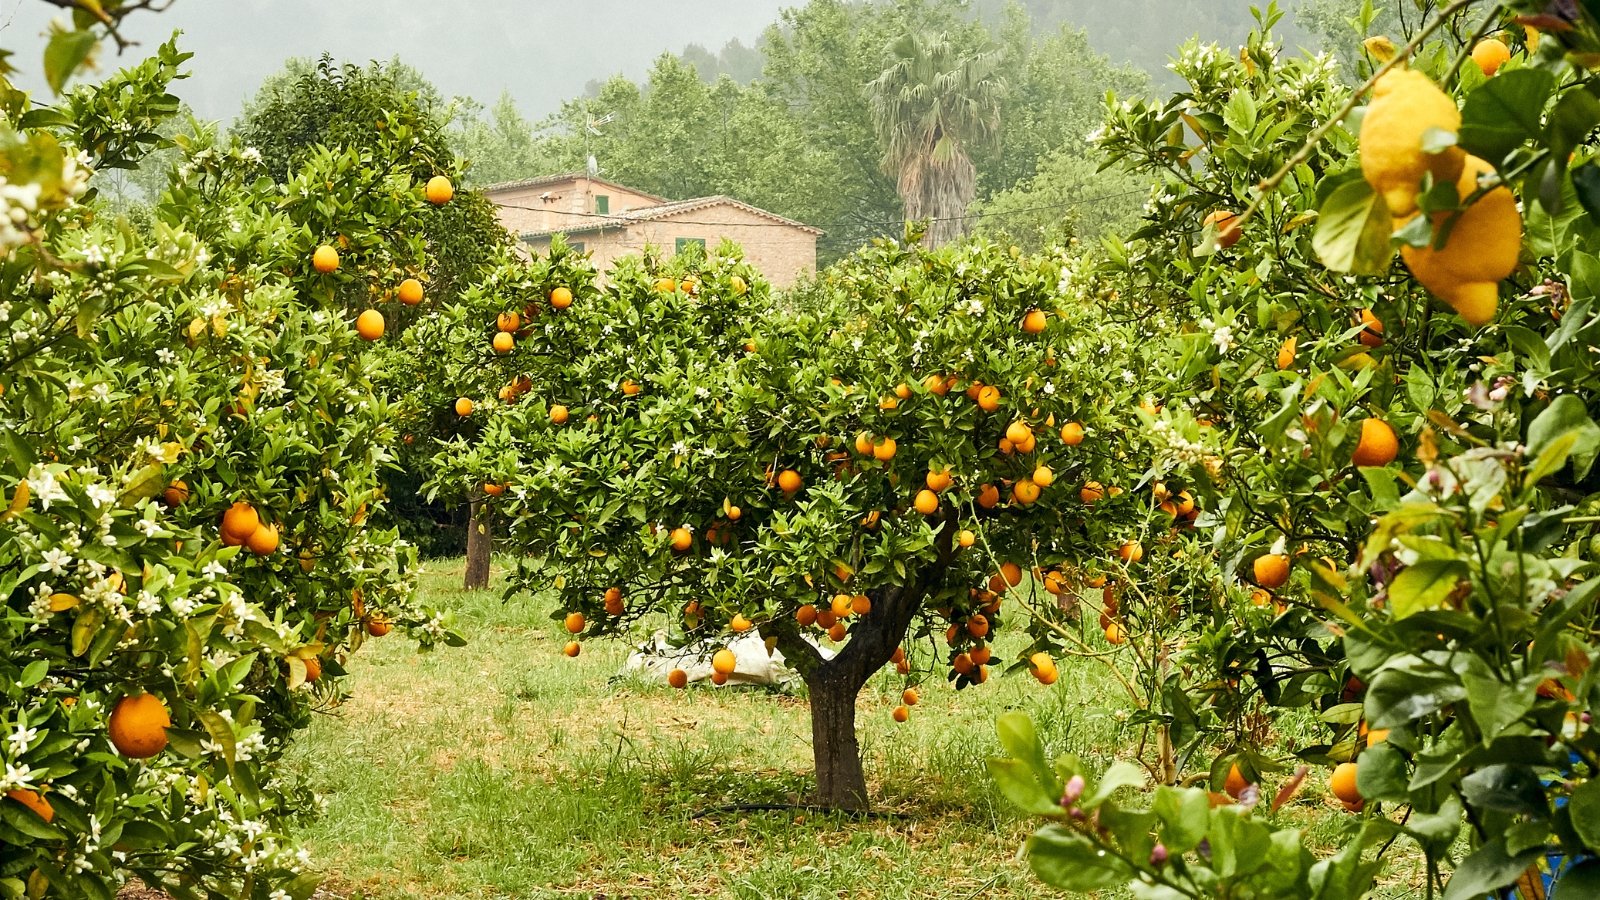 The orange and lemon trees in the orchard exhibit sturdy, lush green branches laden with glossy, dark green leaves and vibrant fruits in shades of orange and yellow.